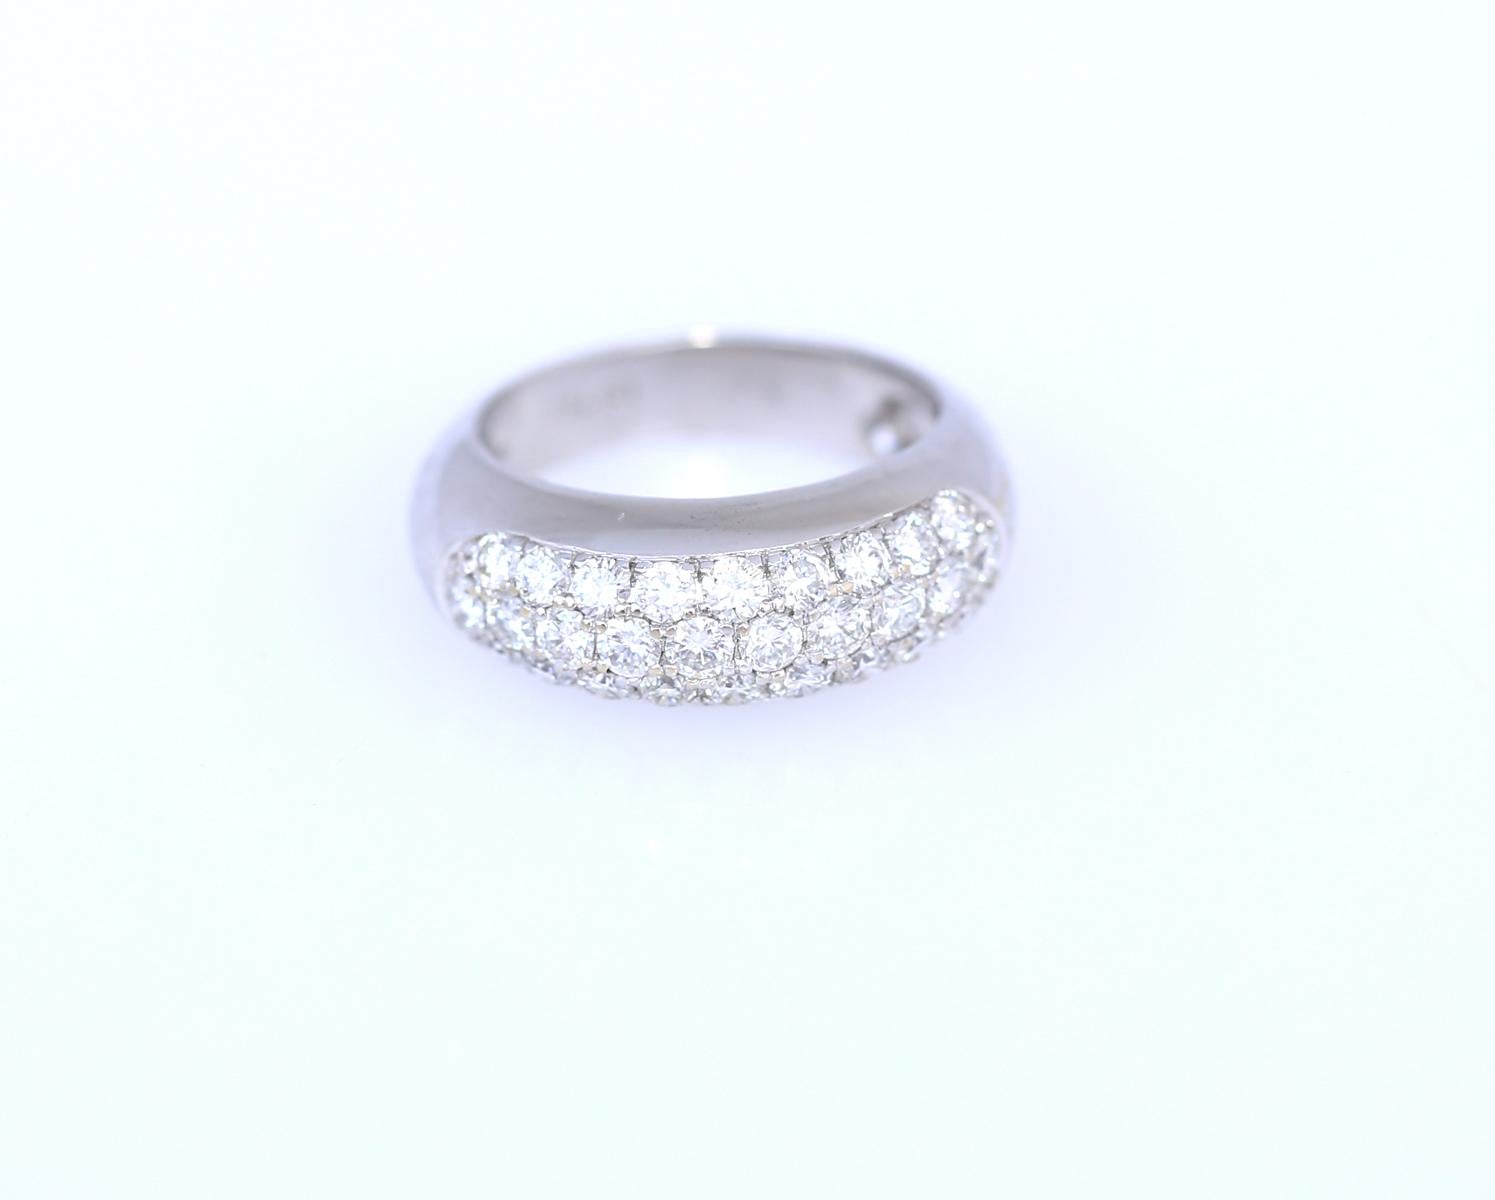 1.3 Carats of fine round cut Diamonds in an 18K White Gold ring.

The design is timelessly classic. Rows of fine Diamonds are facing upwards. The ring itself has a substantial band, with Diamonds fixed on top with the use of an “invisible”